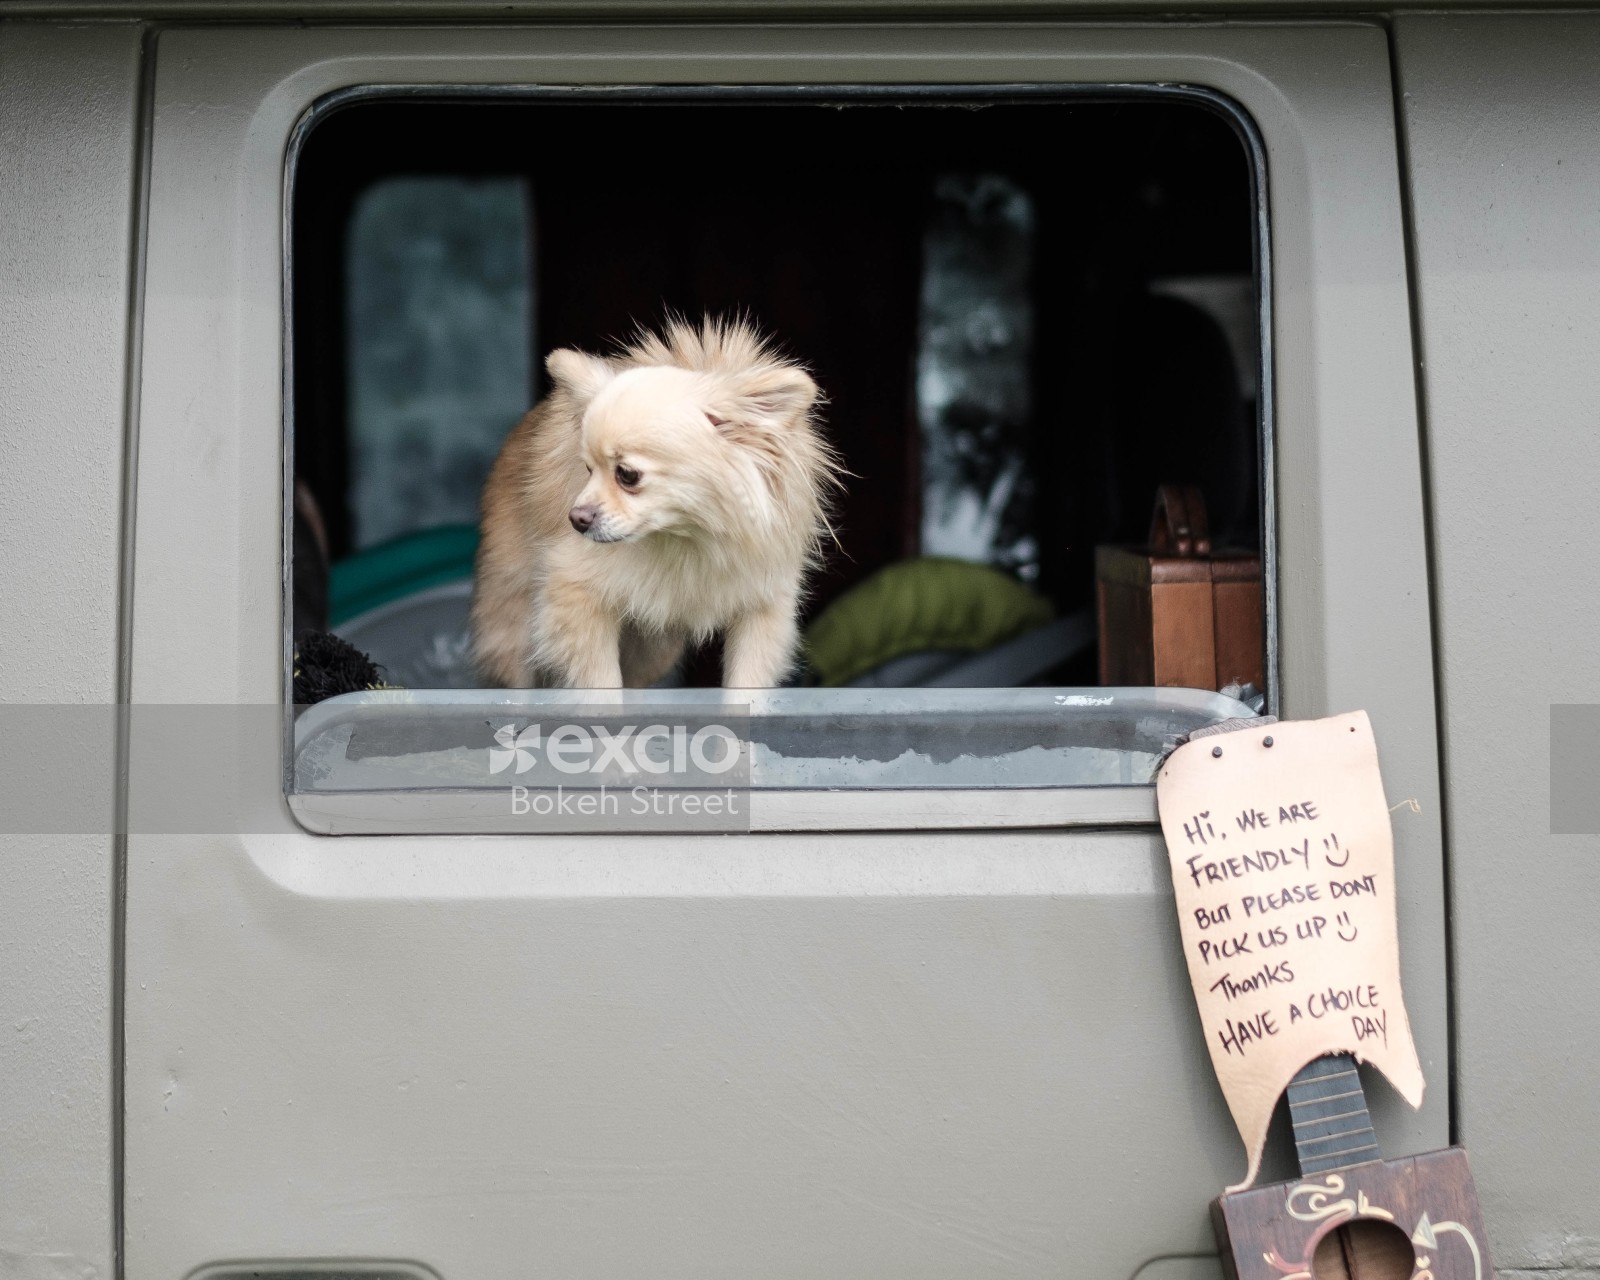 Small dog in the window of an automobile